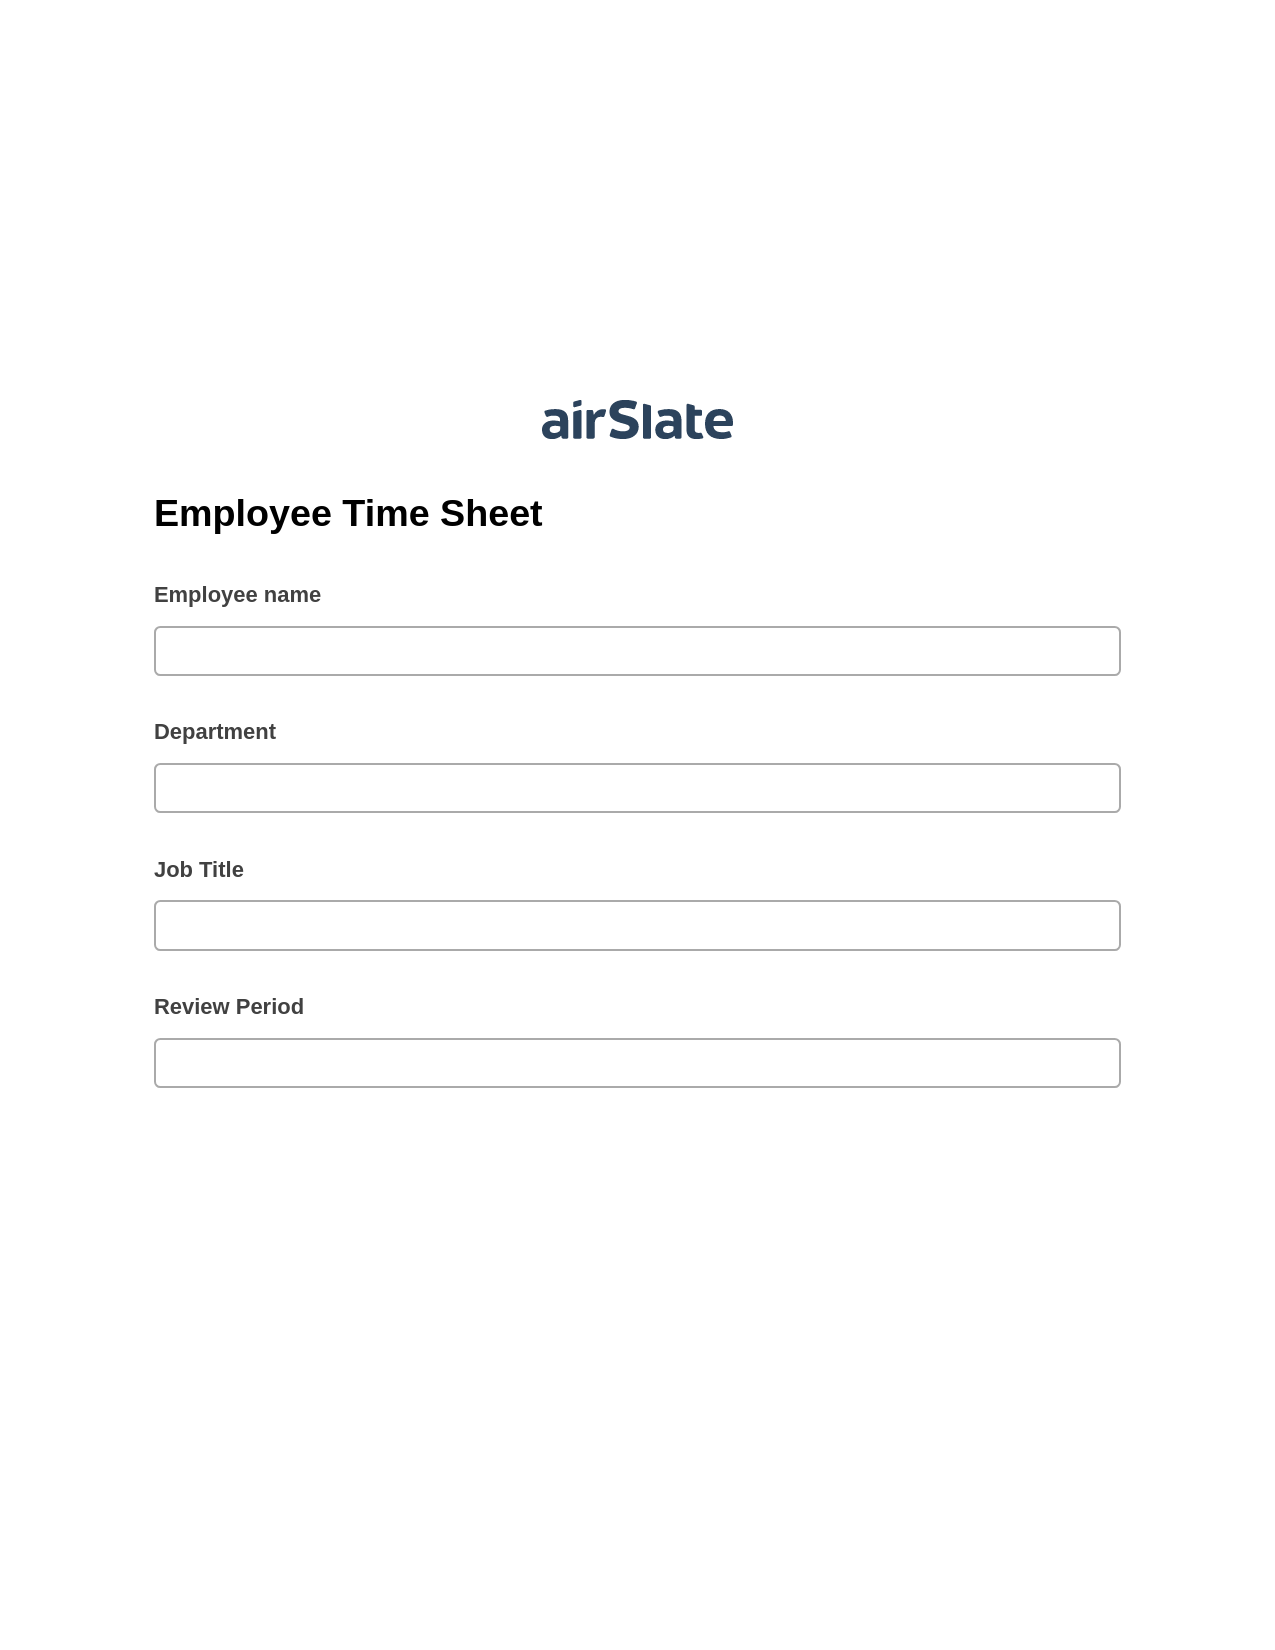 Employee Time Sheet Pre-fill Document Bot, Webhook Bot, Archive to Google Drive Bot